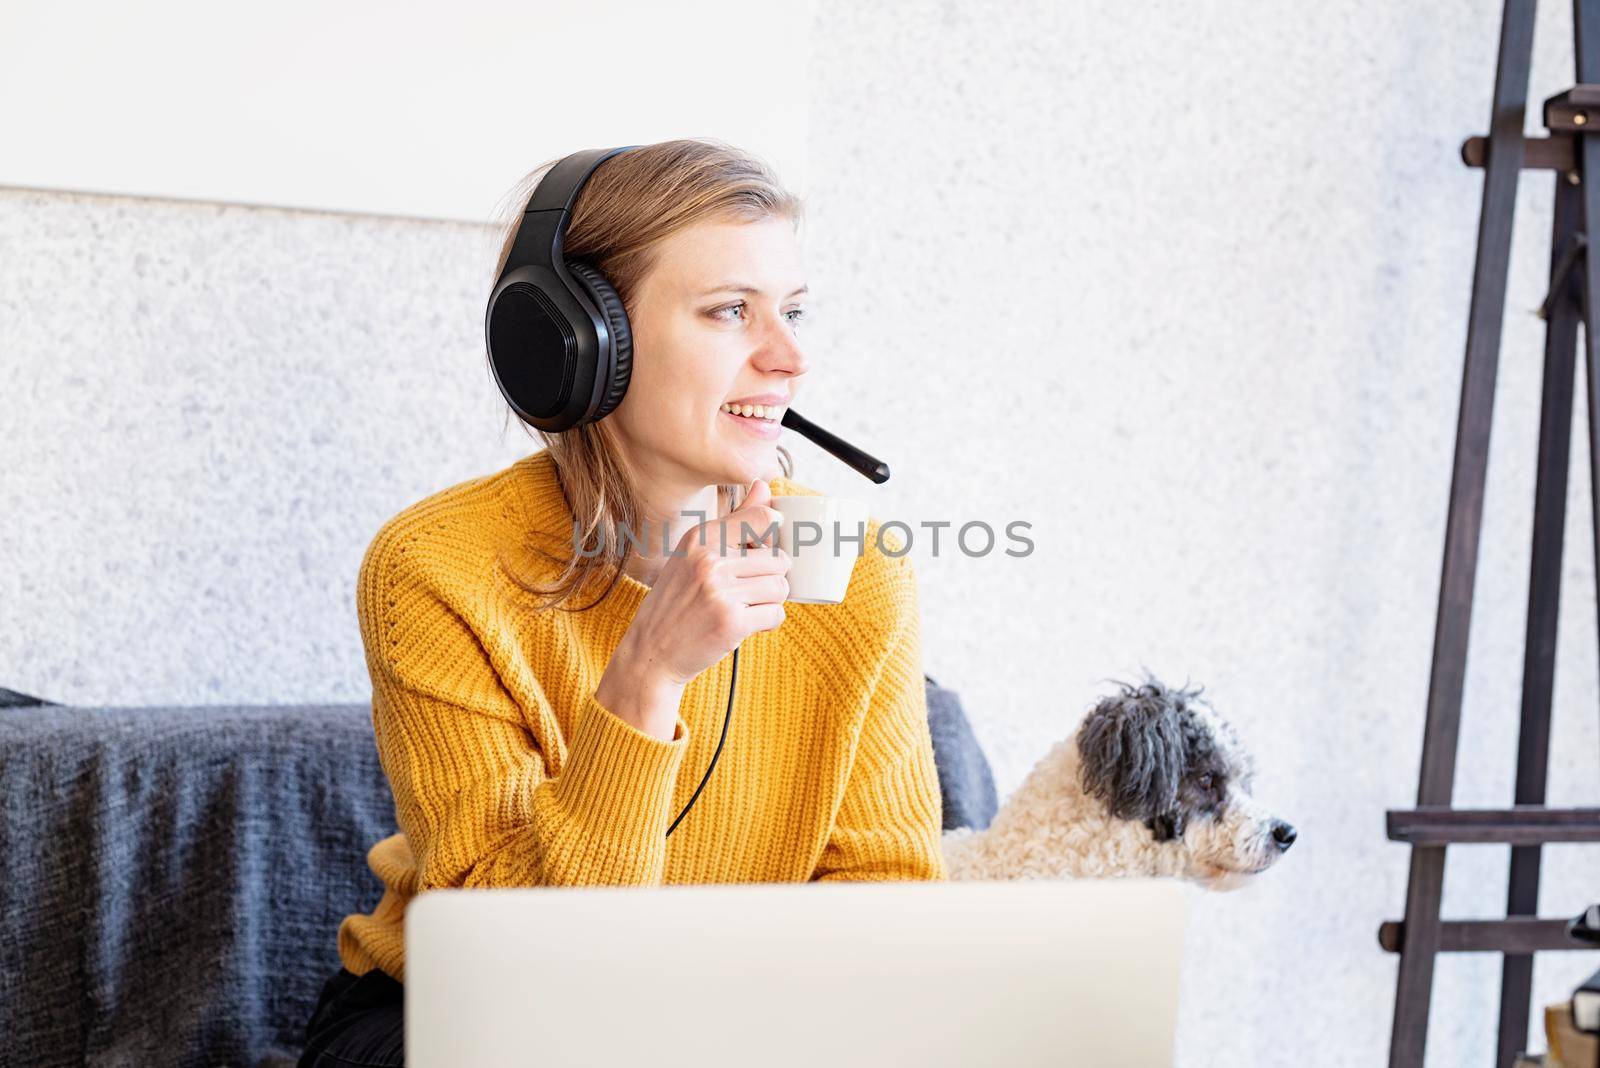 Distance learning. E-learning. Young smiling woman in yellow sweater and black headphones studying online using laptop, sitting on the couch at home